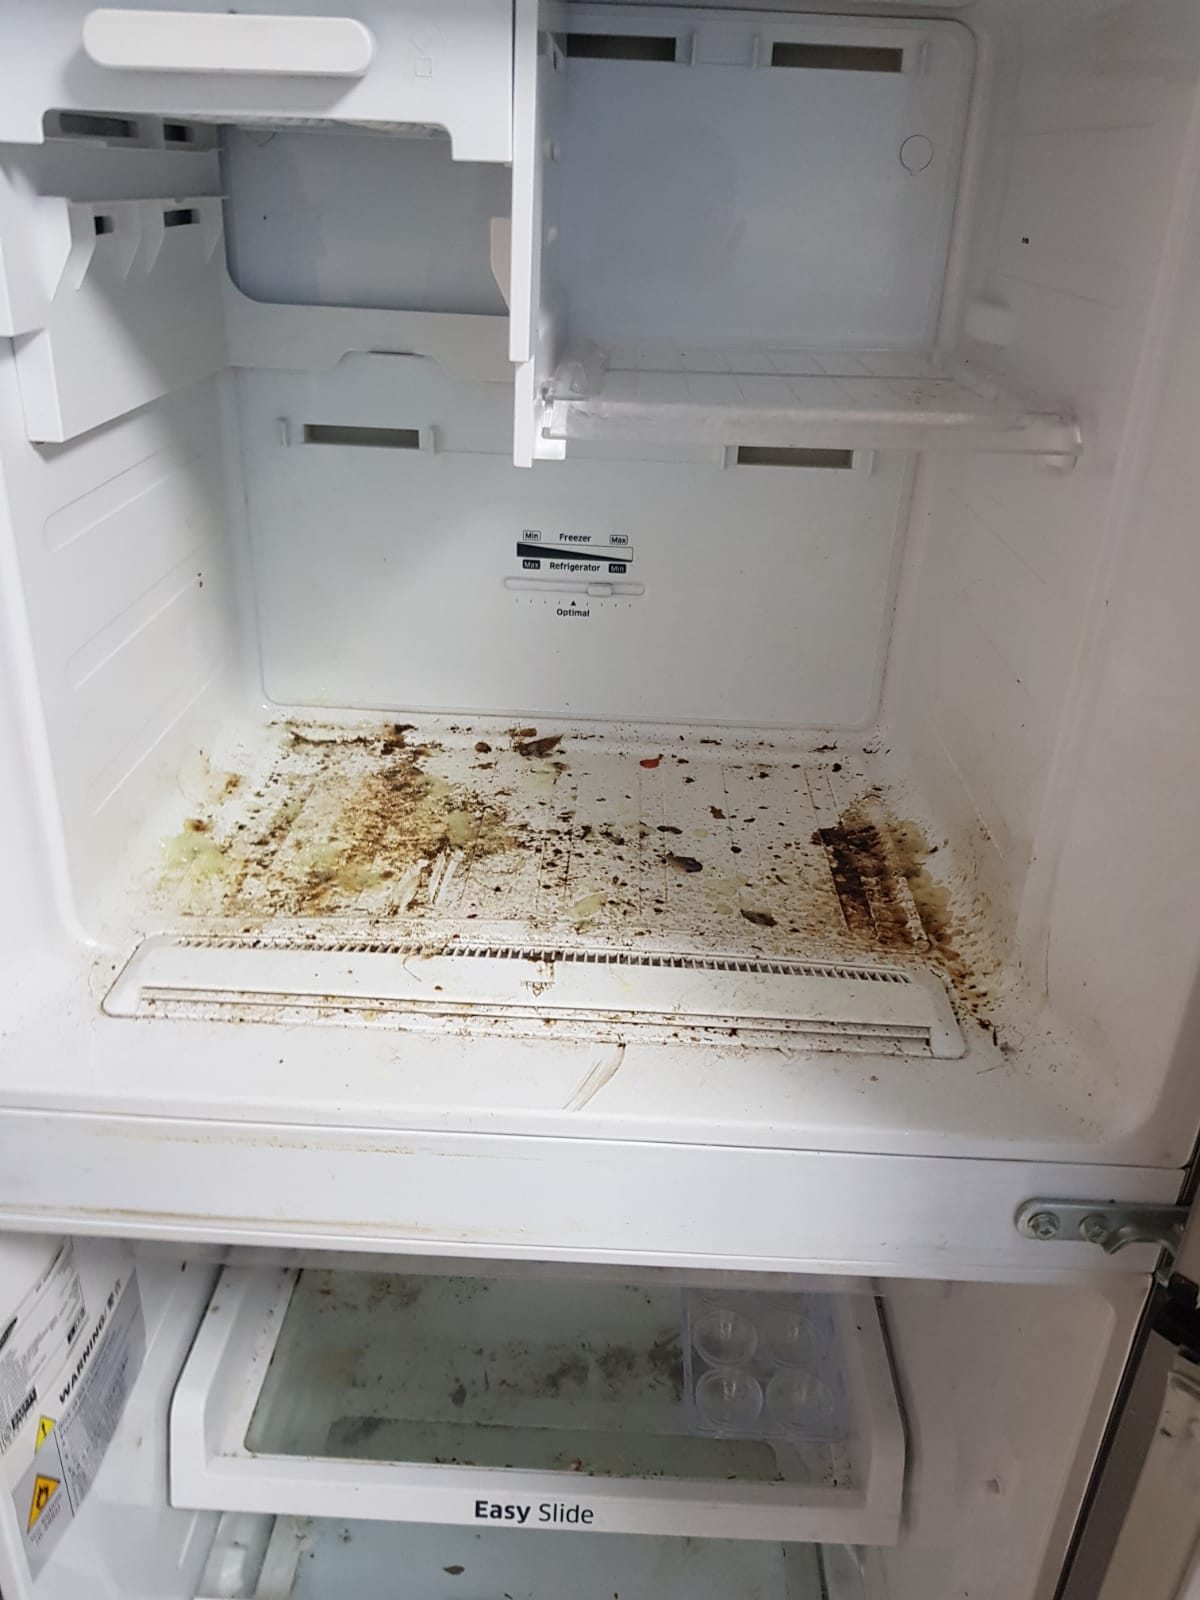 Refrigerator Cleaning Services Singapore - Before Cleaning